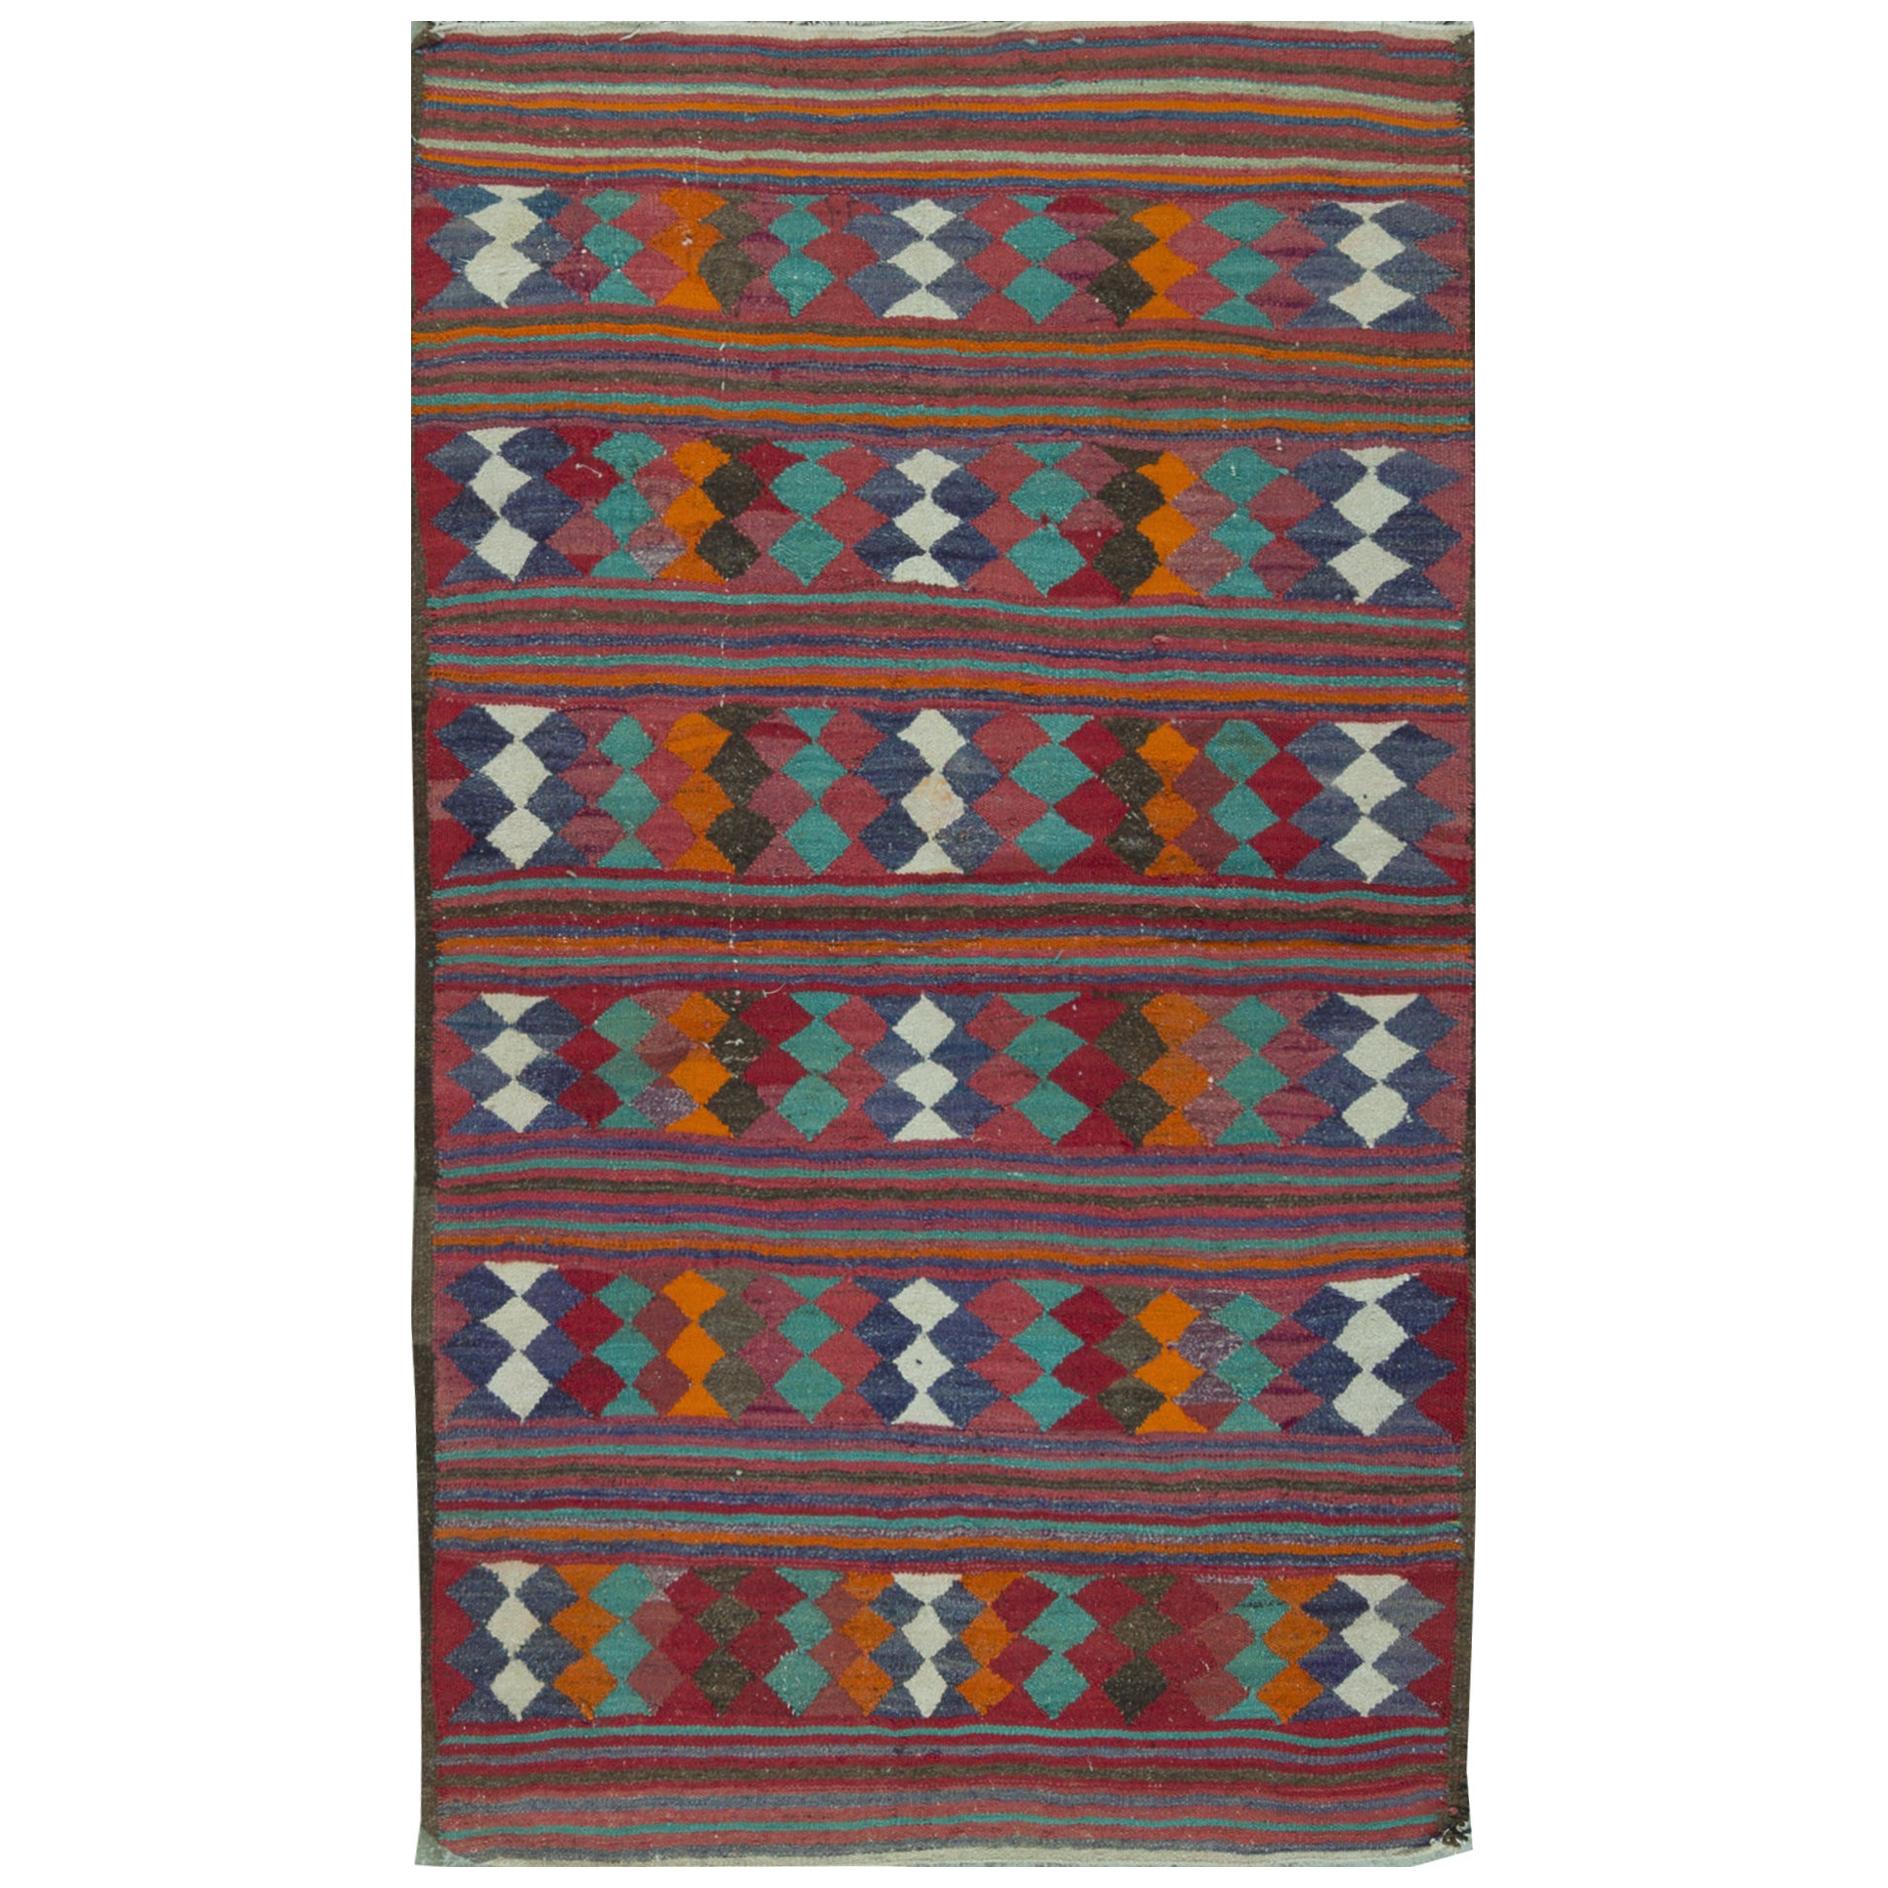 One-of-a-Kind Traditional Handwoven Wool Area Rug 4’2" x 7’2”. For Sale